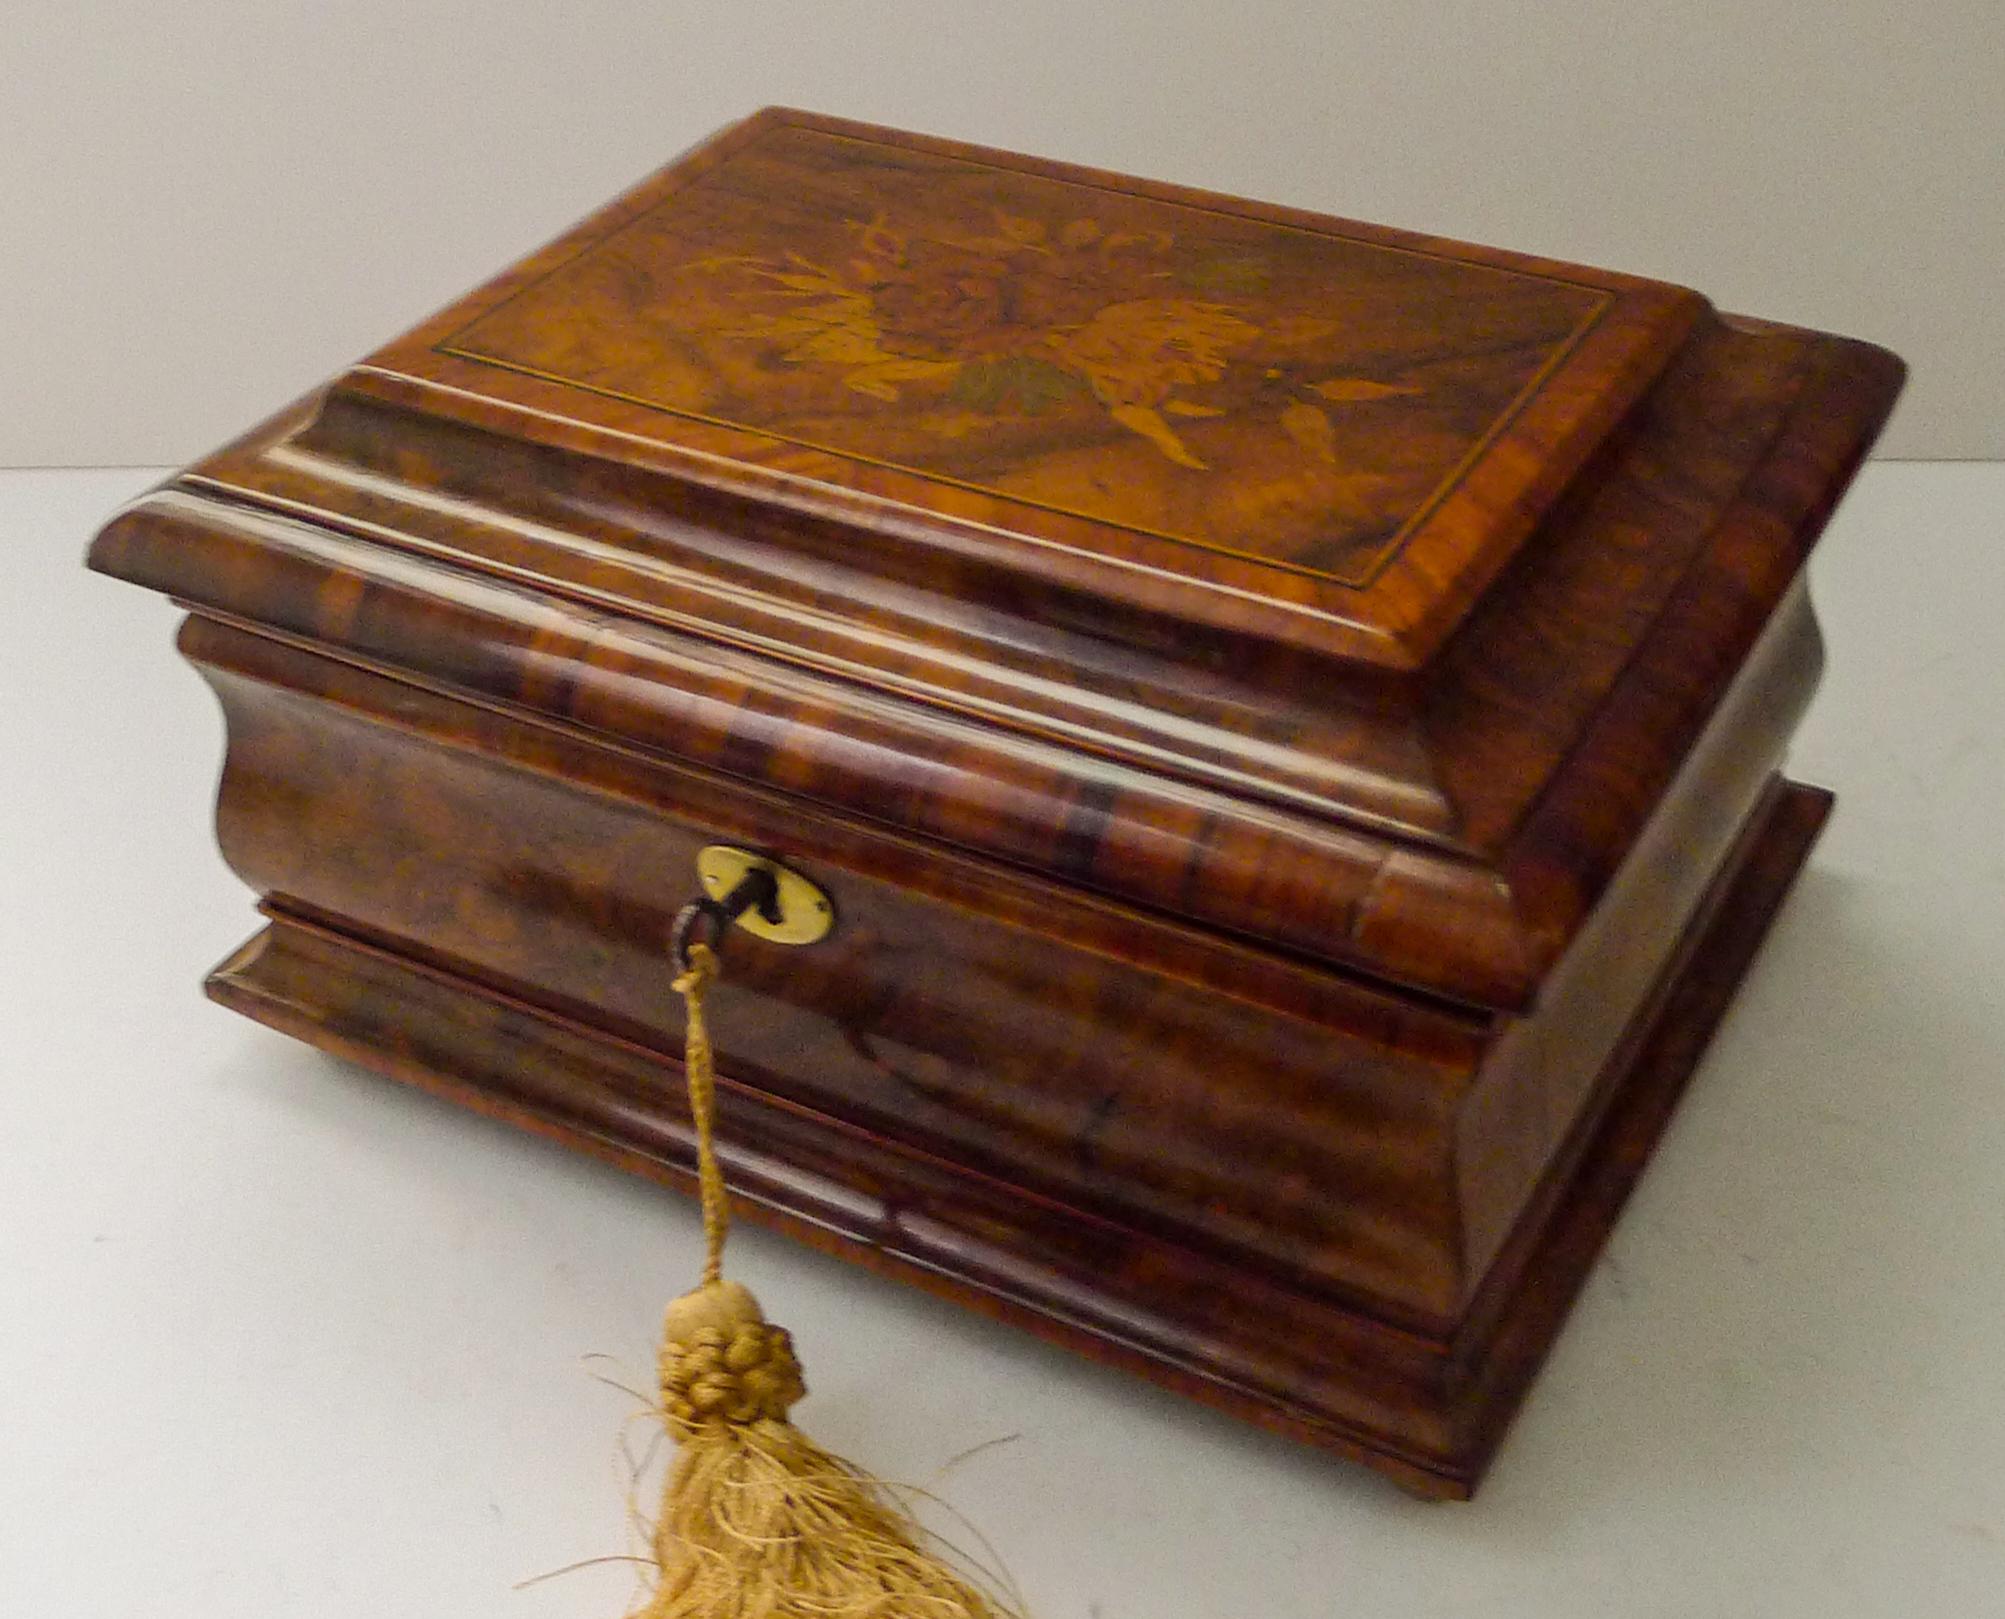 A fabulous and most unusual tea caddy dating to the Regency era, around 1820.

A rare combination of woods has been used, nutty Cognac coloured Walnut and rich graphic Tulipwood.

The top has exquisite and intricate Marquetry inlay featuring a